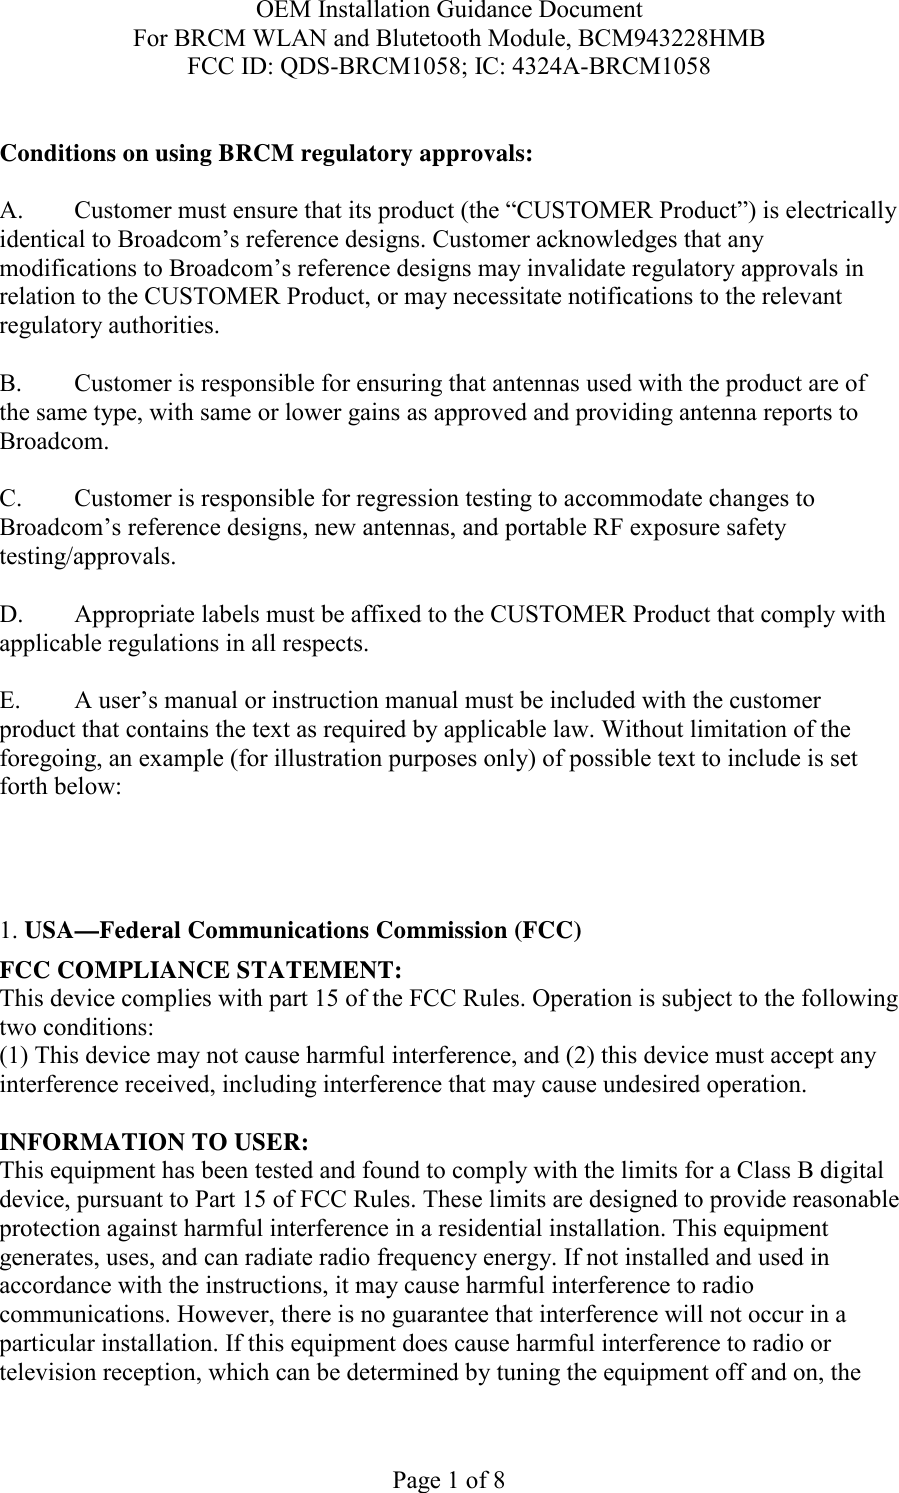 OEM Installation Guidance Document For BRCM WLAN and Blutetooth Module, BCM943228HMB FCC ID: QDS-BRCM1058; IC: 4324A-BRCM1058  Page 1 of 8  Conditions on using BRCM regulatory approvals:   A.  Customer must ensure that its product (the “CUSTOMER Product”) is electrically identical to Broadcom’s reference designs. Customer acknowledges that any modifications to Broadcom’s reference designs may invalidate regulatory approvals in relation to the CUSTOMER Product, or may necessitate notifications to the relevant regulatory authorities.  B.   Customer is responsible for ensuring that antennas used with the product are of the same type, with same or lower gains as approved and providing antenna reports to Broadcom.  C.   Customer is responsible for regression testing to accommodate changes to Broadcom’s reference designs, new antennas, and portable RF exposure safety testing/approvals.  D.  Appropriate labels must be affixed to the CUSTOMER Product that comply with applicable regulations in all respects.    E.  A user’s manual or instruction manual must be included with the customer product that contains the text as required by applicable law. Without limitation of the foregoing, an example (for illustration purposes only) of possible text to include is set forth below:      1. USA—Federal Communications Commission (FCC) FCC COMPLIANCE STATEMENT: This device complies with part 15 of the FCC Rules. Operation is subject to the following two conditions: (1) This device may not cause harmful interference, and (2) this device must accept any interference received, including interference that may cause undesired operation.  INFORMATION TO USER: This equipment has been tested and found to comply with the limits for a Class B digital device, pursuant to Part 15 of FCC Rules. These limits are designed to provide reasonable protection against harmful interference in a residential installation. This equipment generates, uses, and can radiate radio frequency energy. If not installed and used in accordance with the instructions, it may cause harmful interference to radio communications. However, there is no guarantee that interference will not occur in a particular installation. If this equipment does cause harmful interference to radio or television reception, which can be determined by tuning the equipment off and on, the 